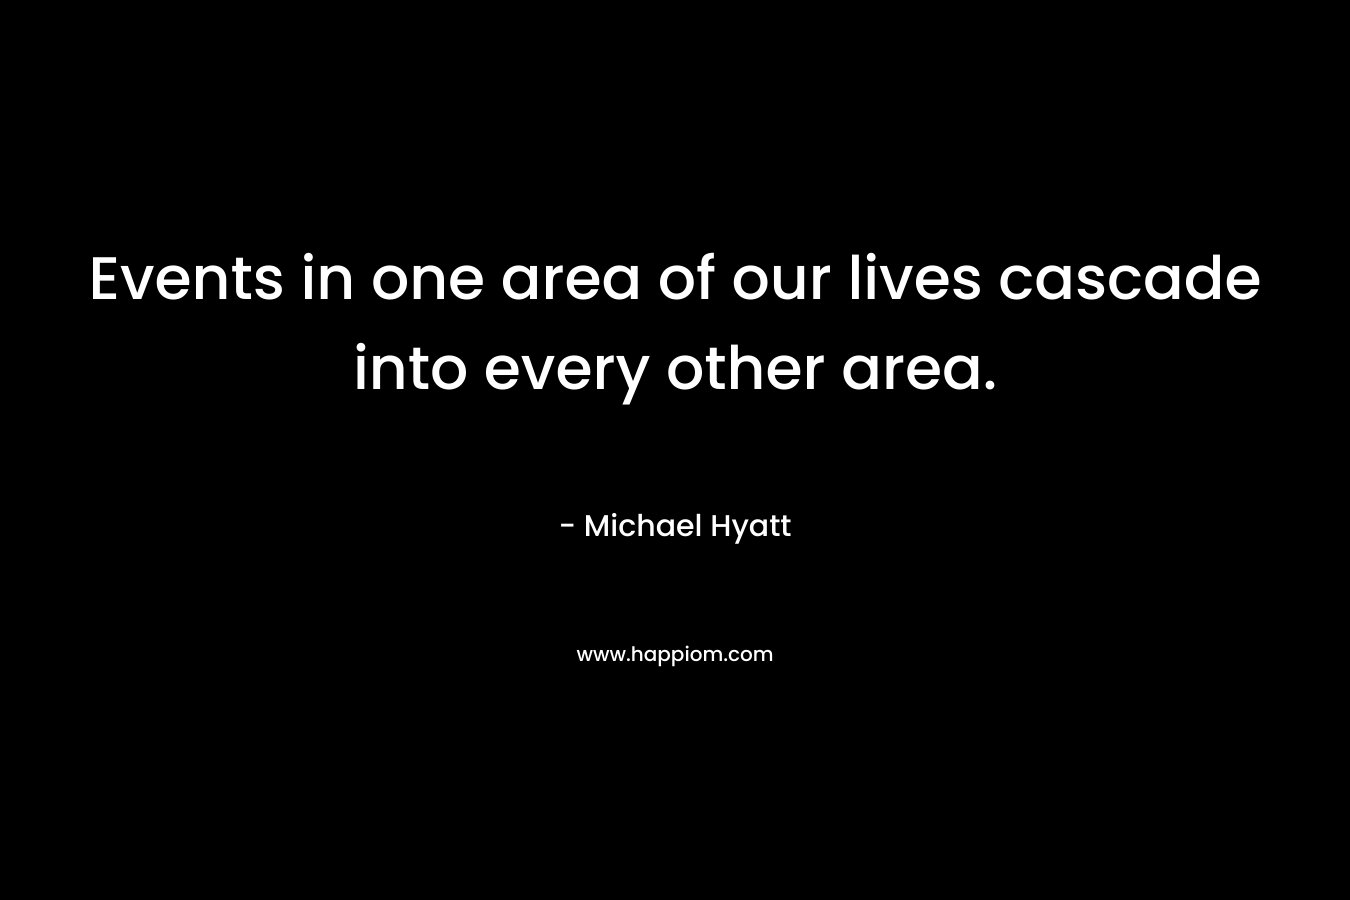 Events in one area of our lives cascade into every other area. – Michael Hyatt